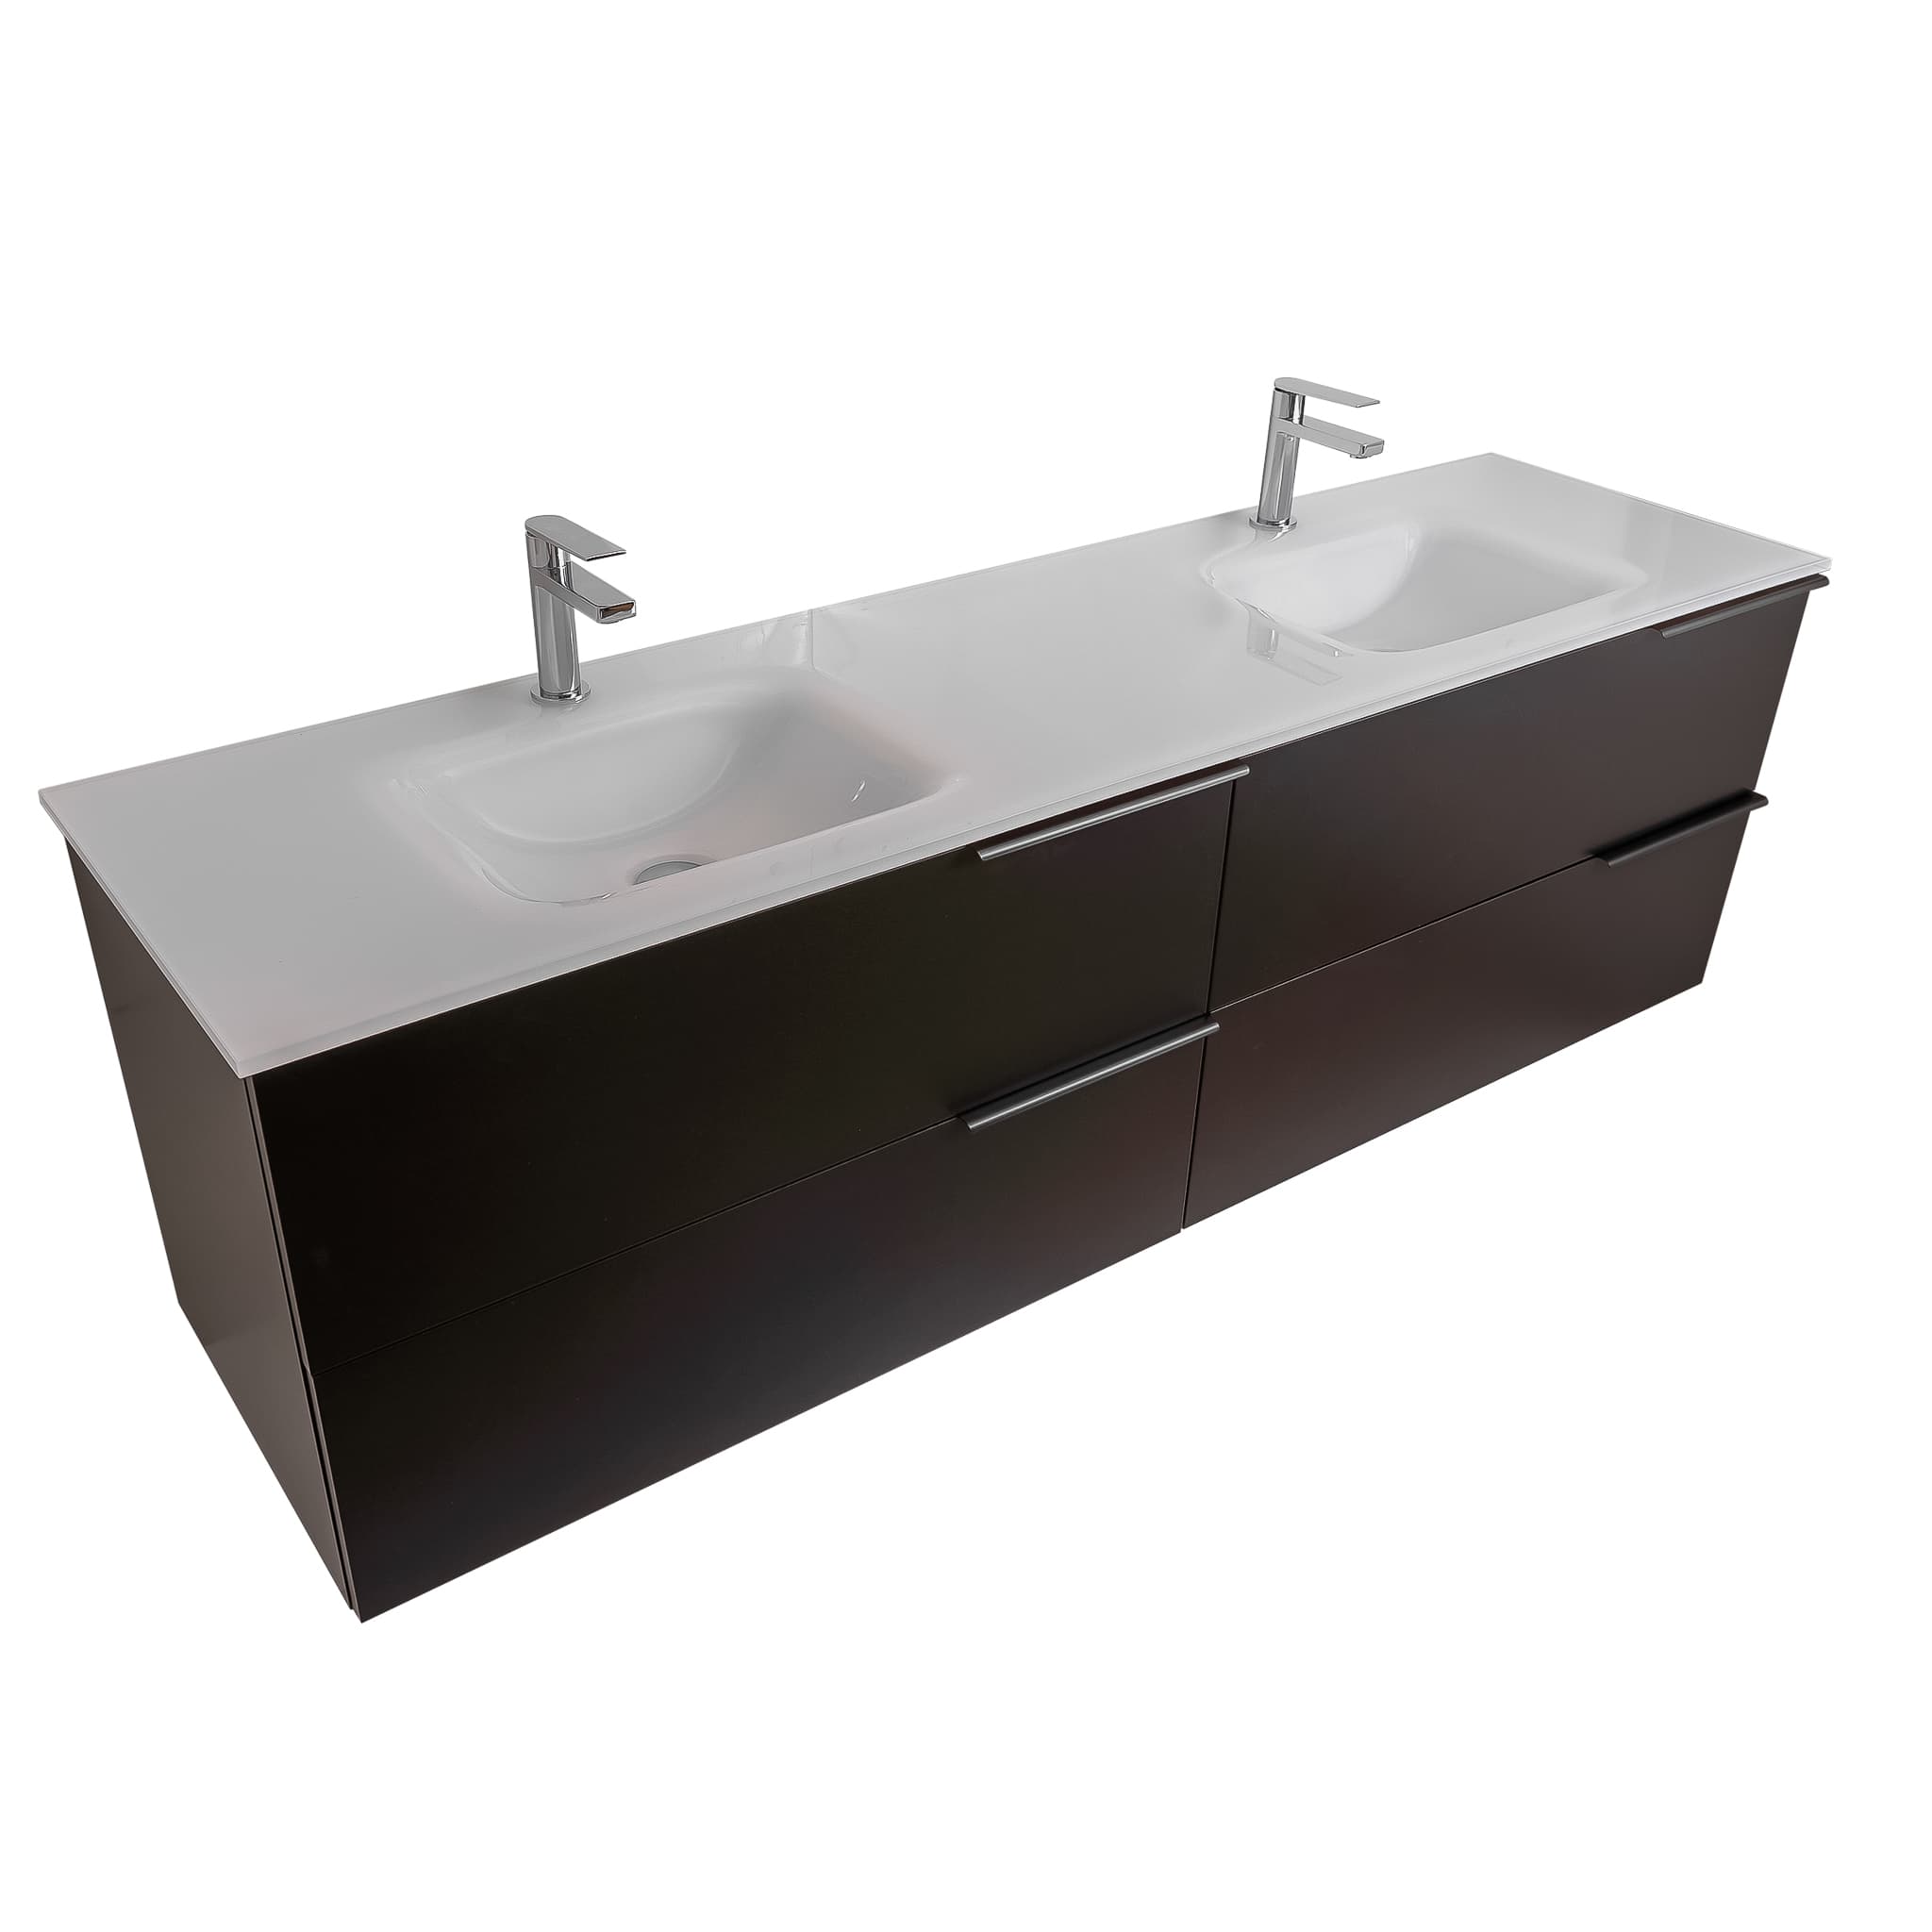 Mallorca 72 Matte Black Cabinet, White Tempered Glass Double Sink, Wall Mounted Modern Vanity Set